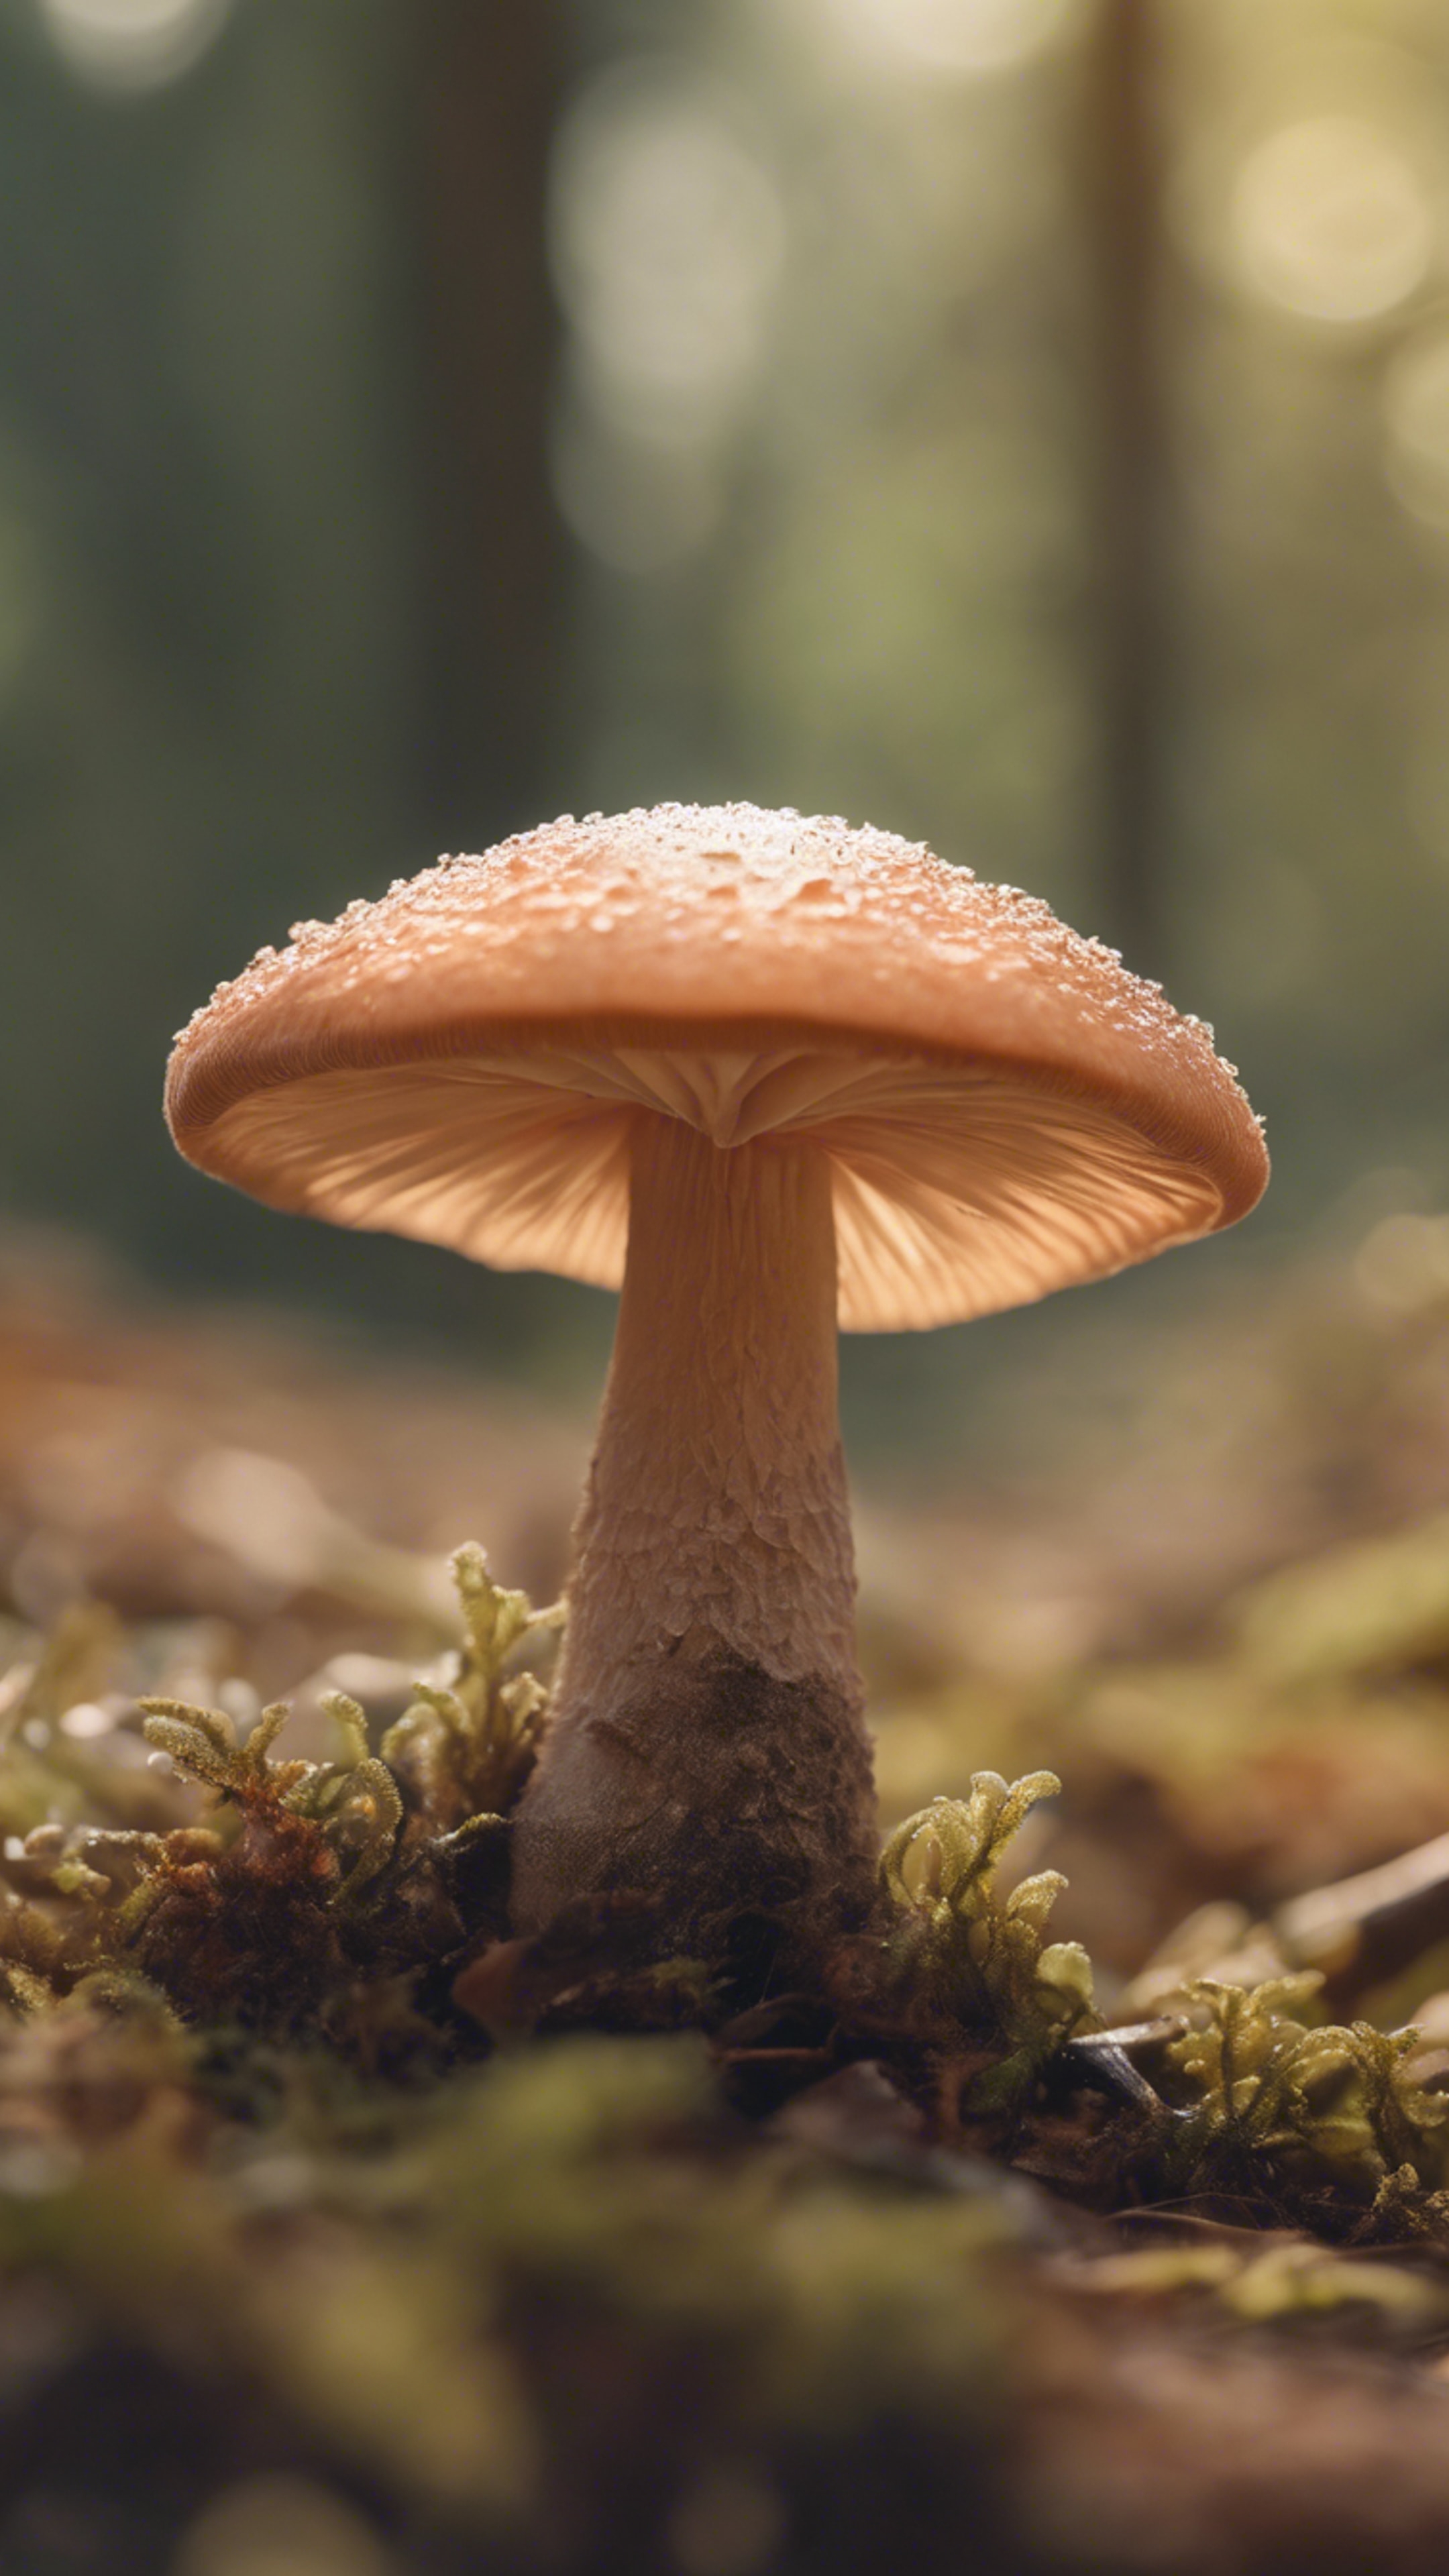 A close-up of a small, cute mushroom, peach color, with soft, sunlit forest scenery in the background. Tapeta[125df3bad49b42d8bf38]